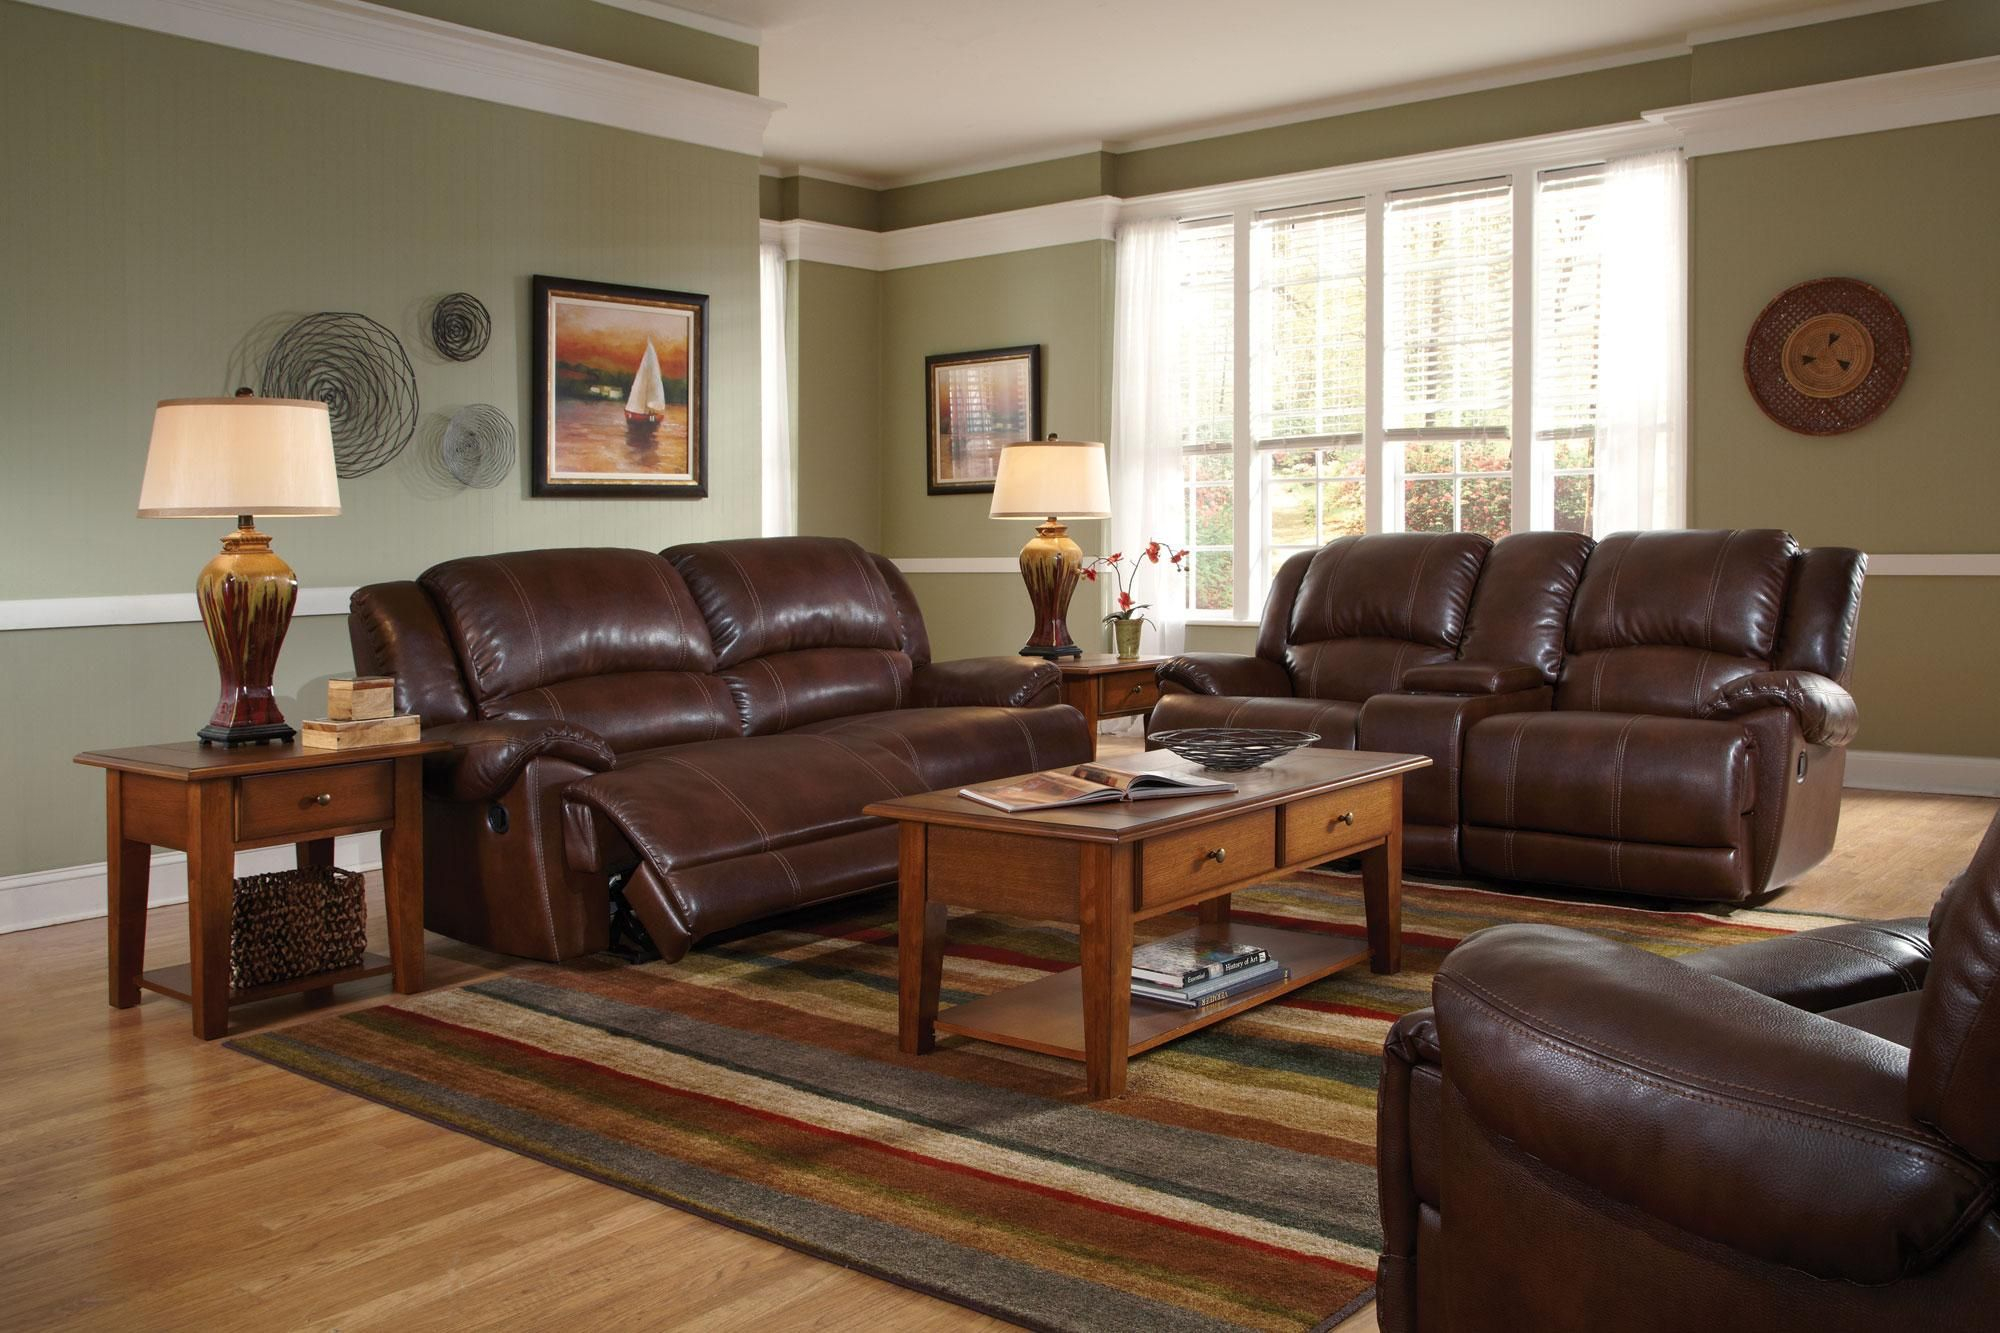 Paint Colours To Go With Brown Leather Sofa • Patio Ideas